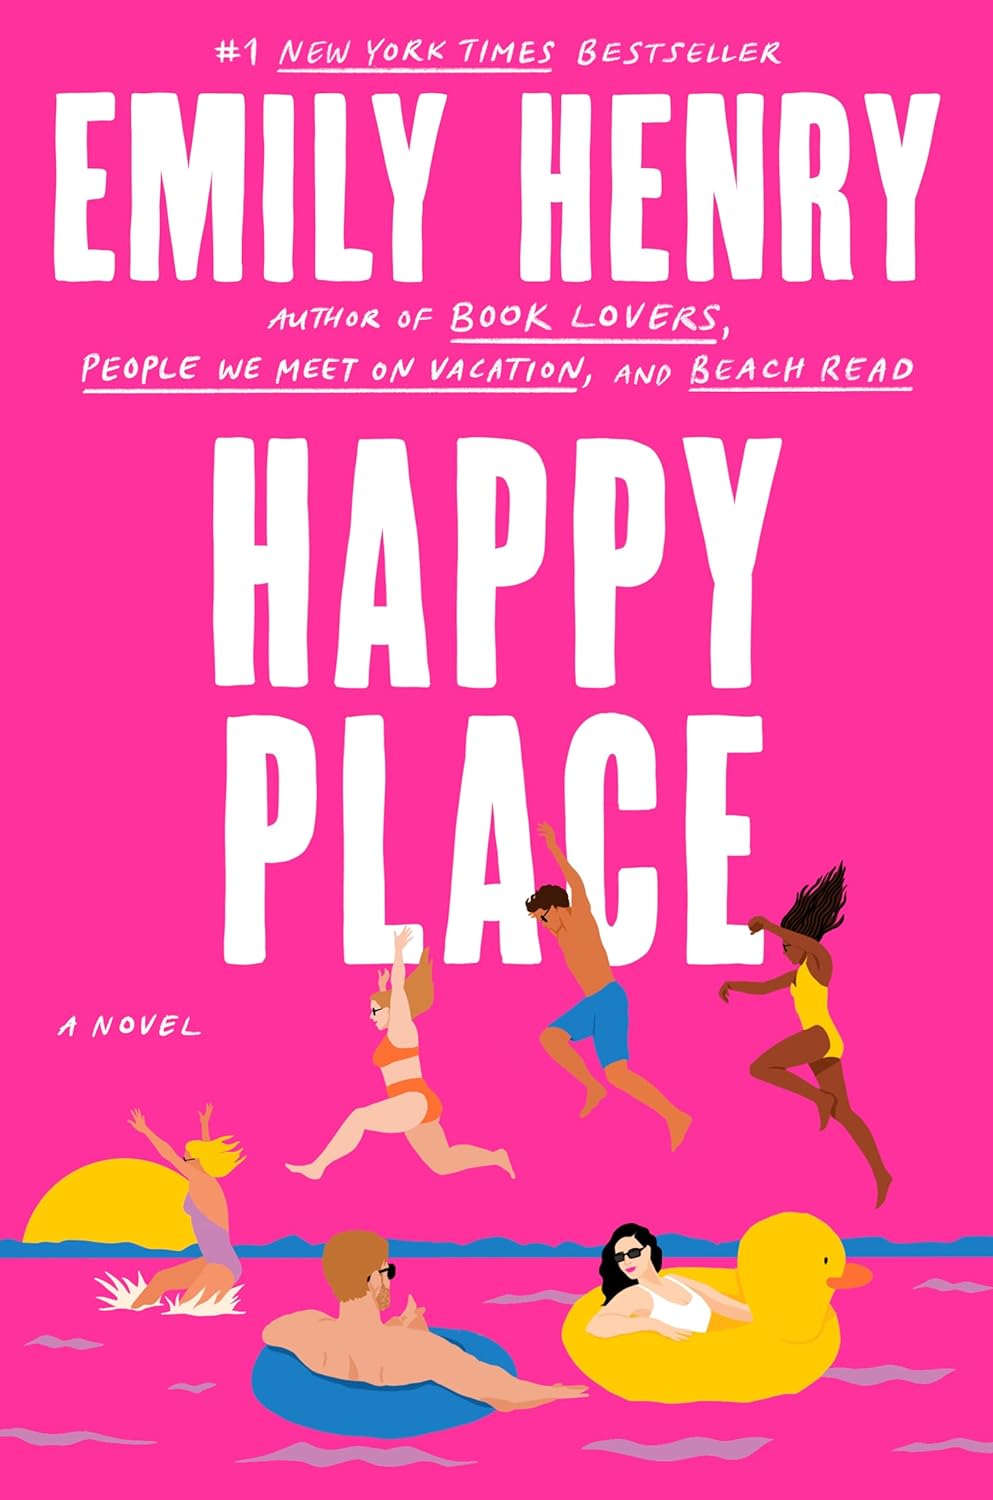 Happy Place by Emily Henry - Hardcover